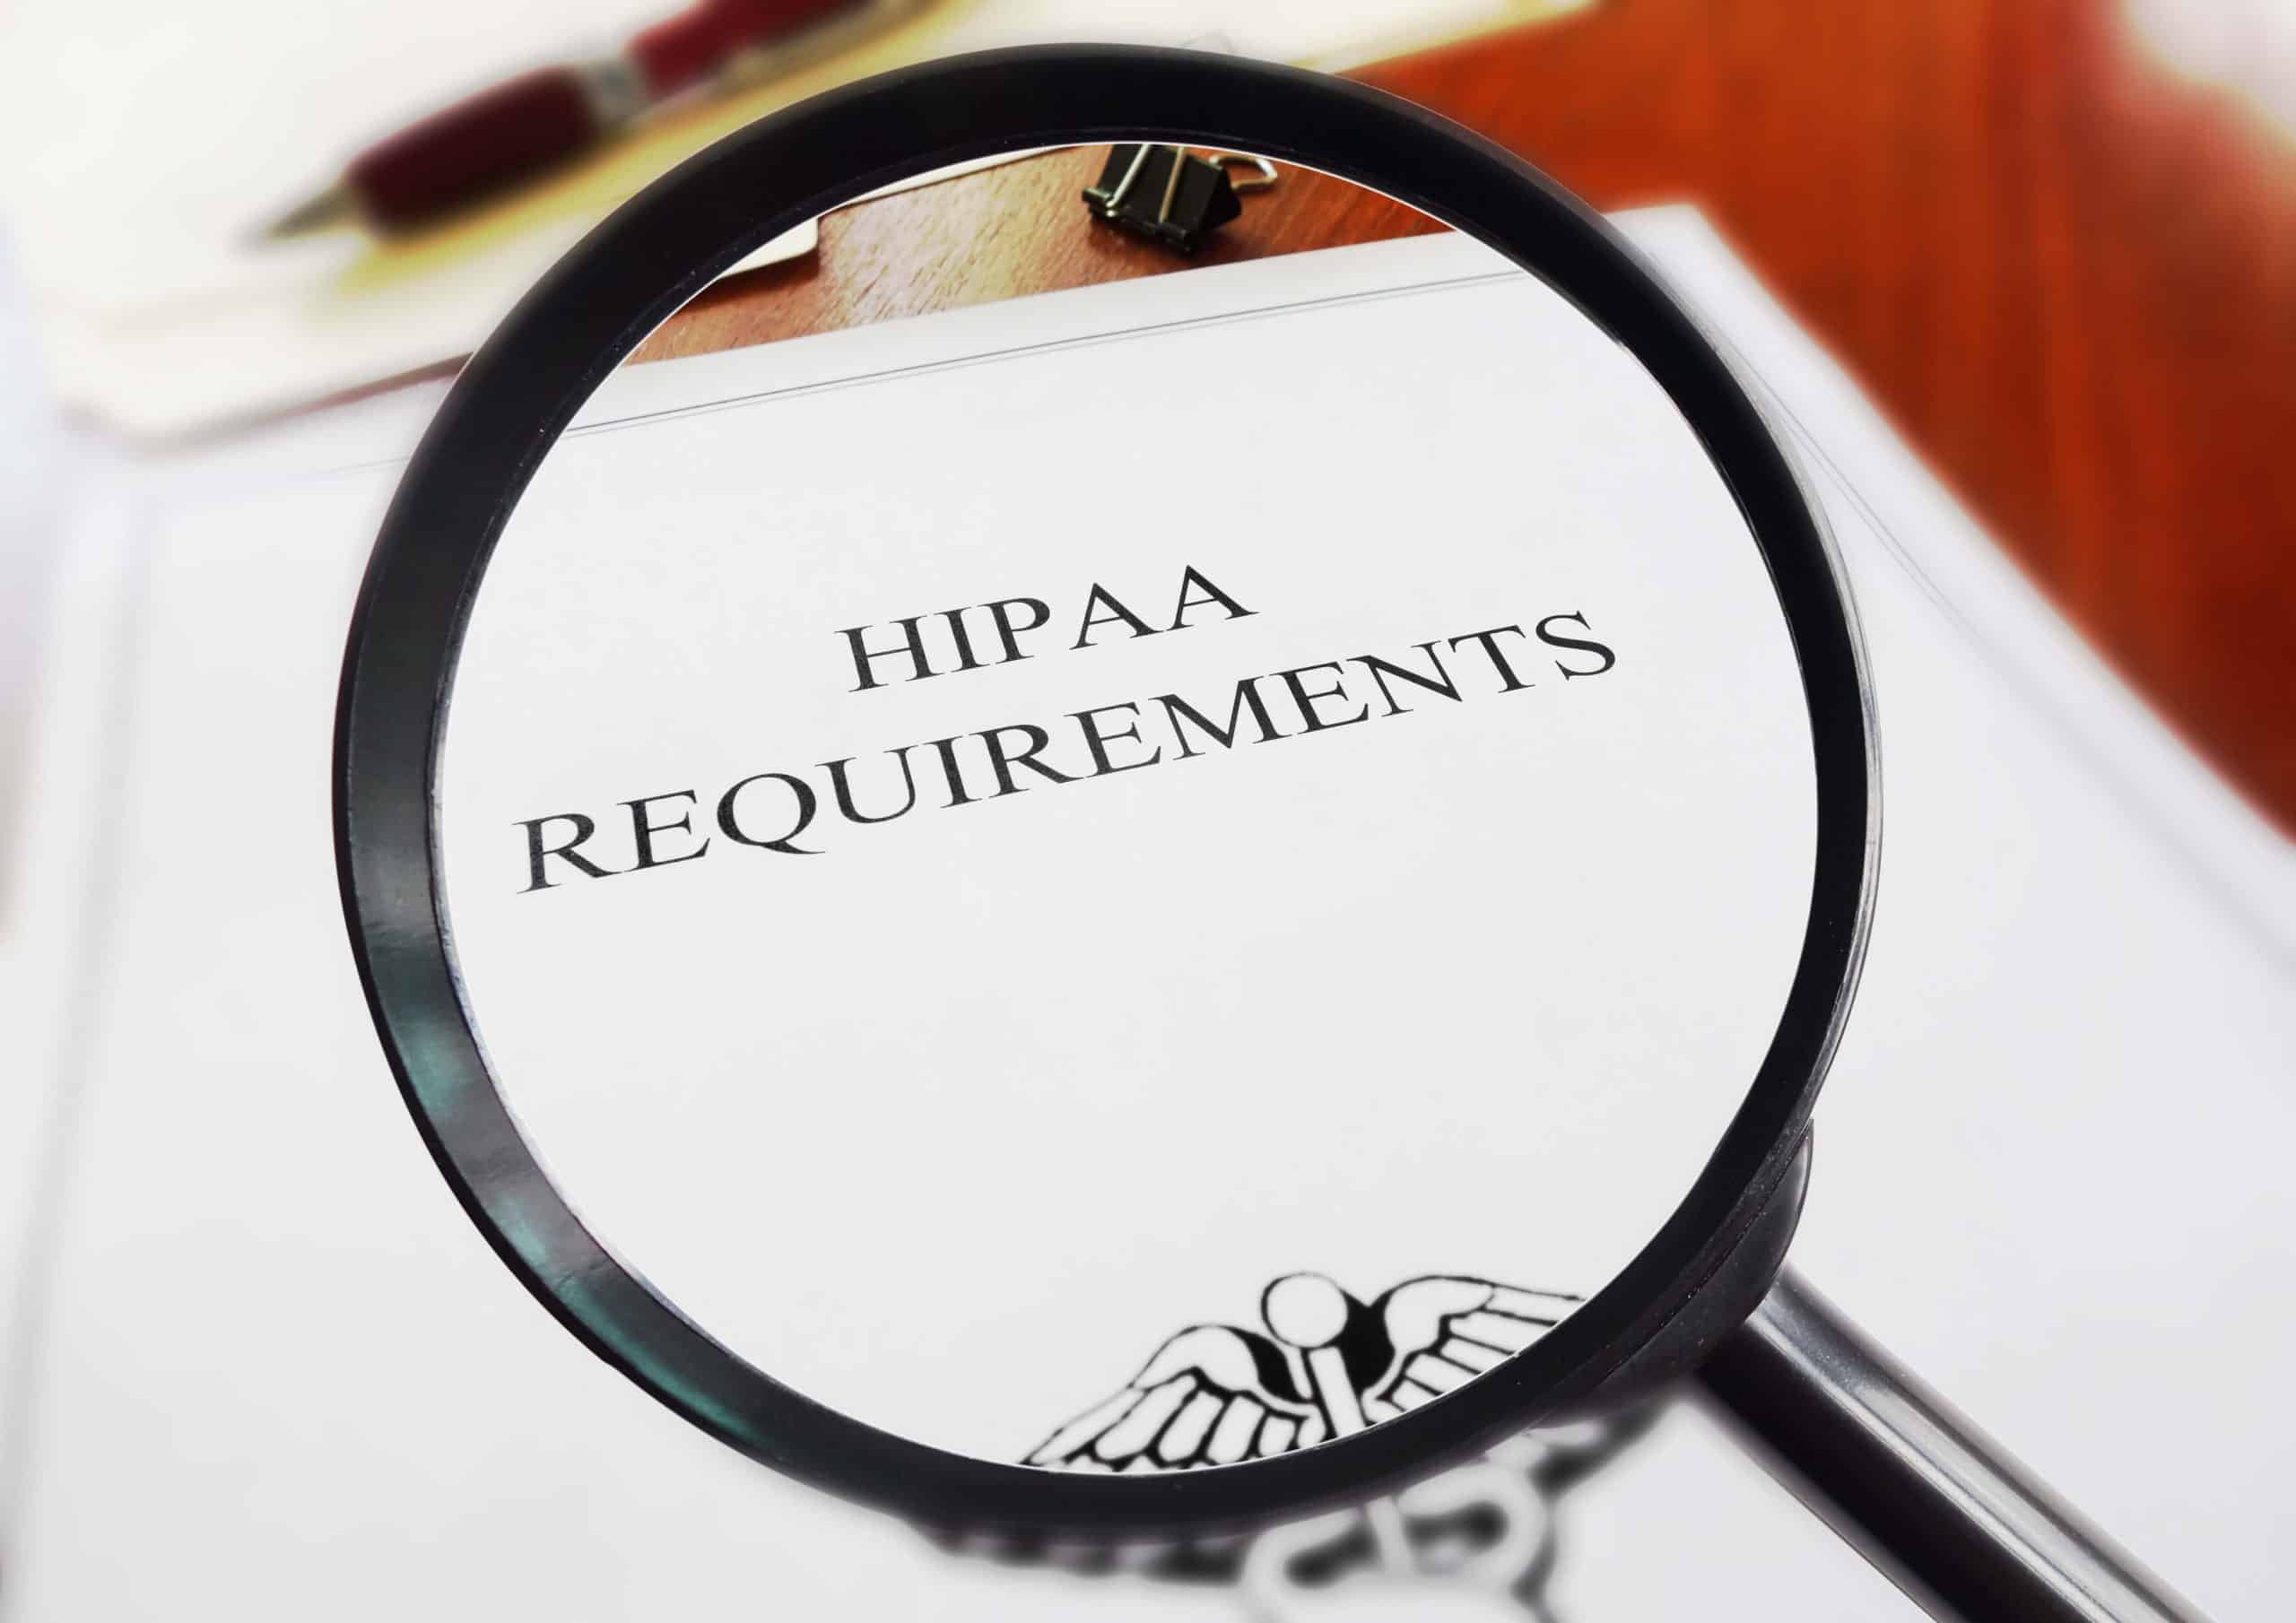 HIPAA requirements on a document under a magnifying glass.